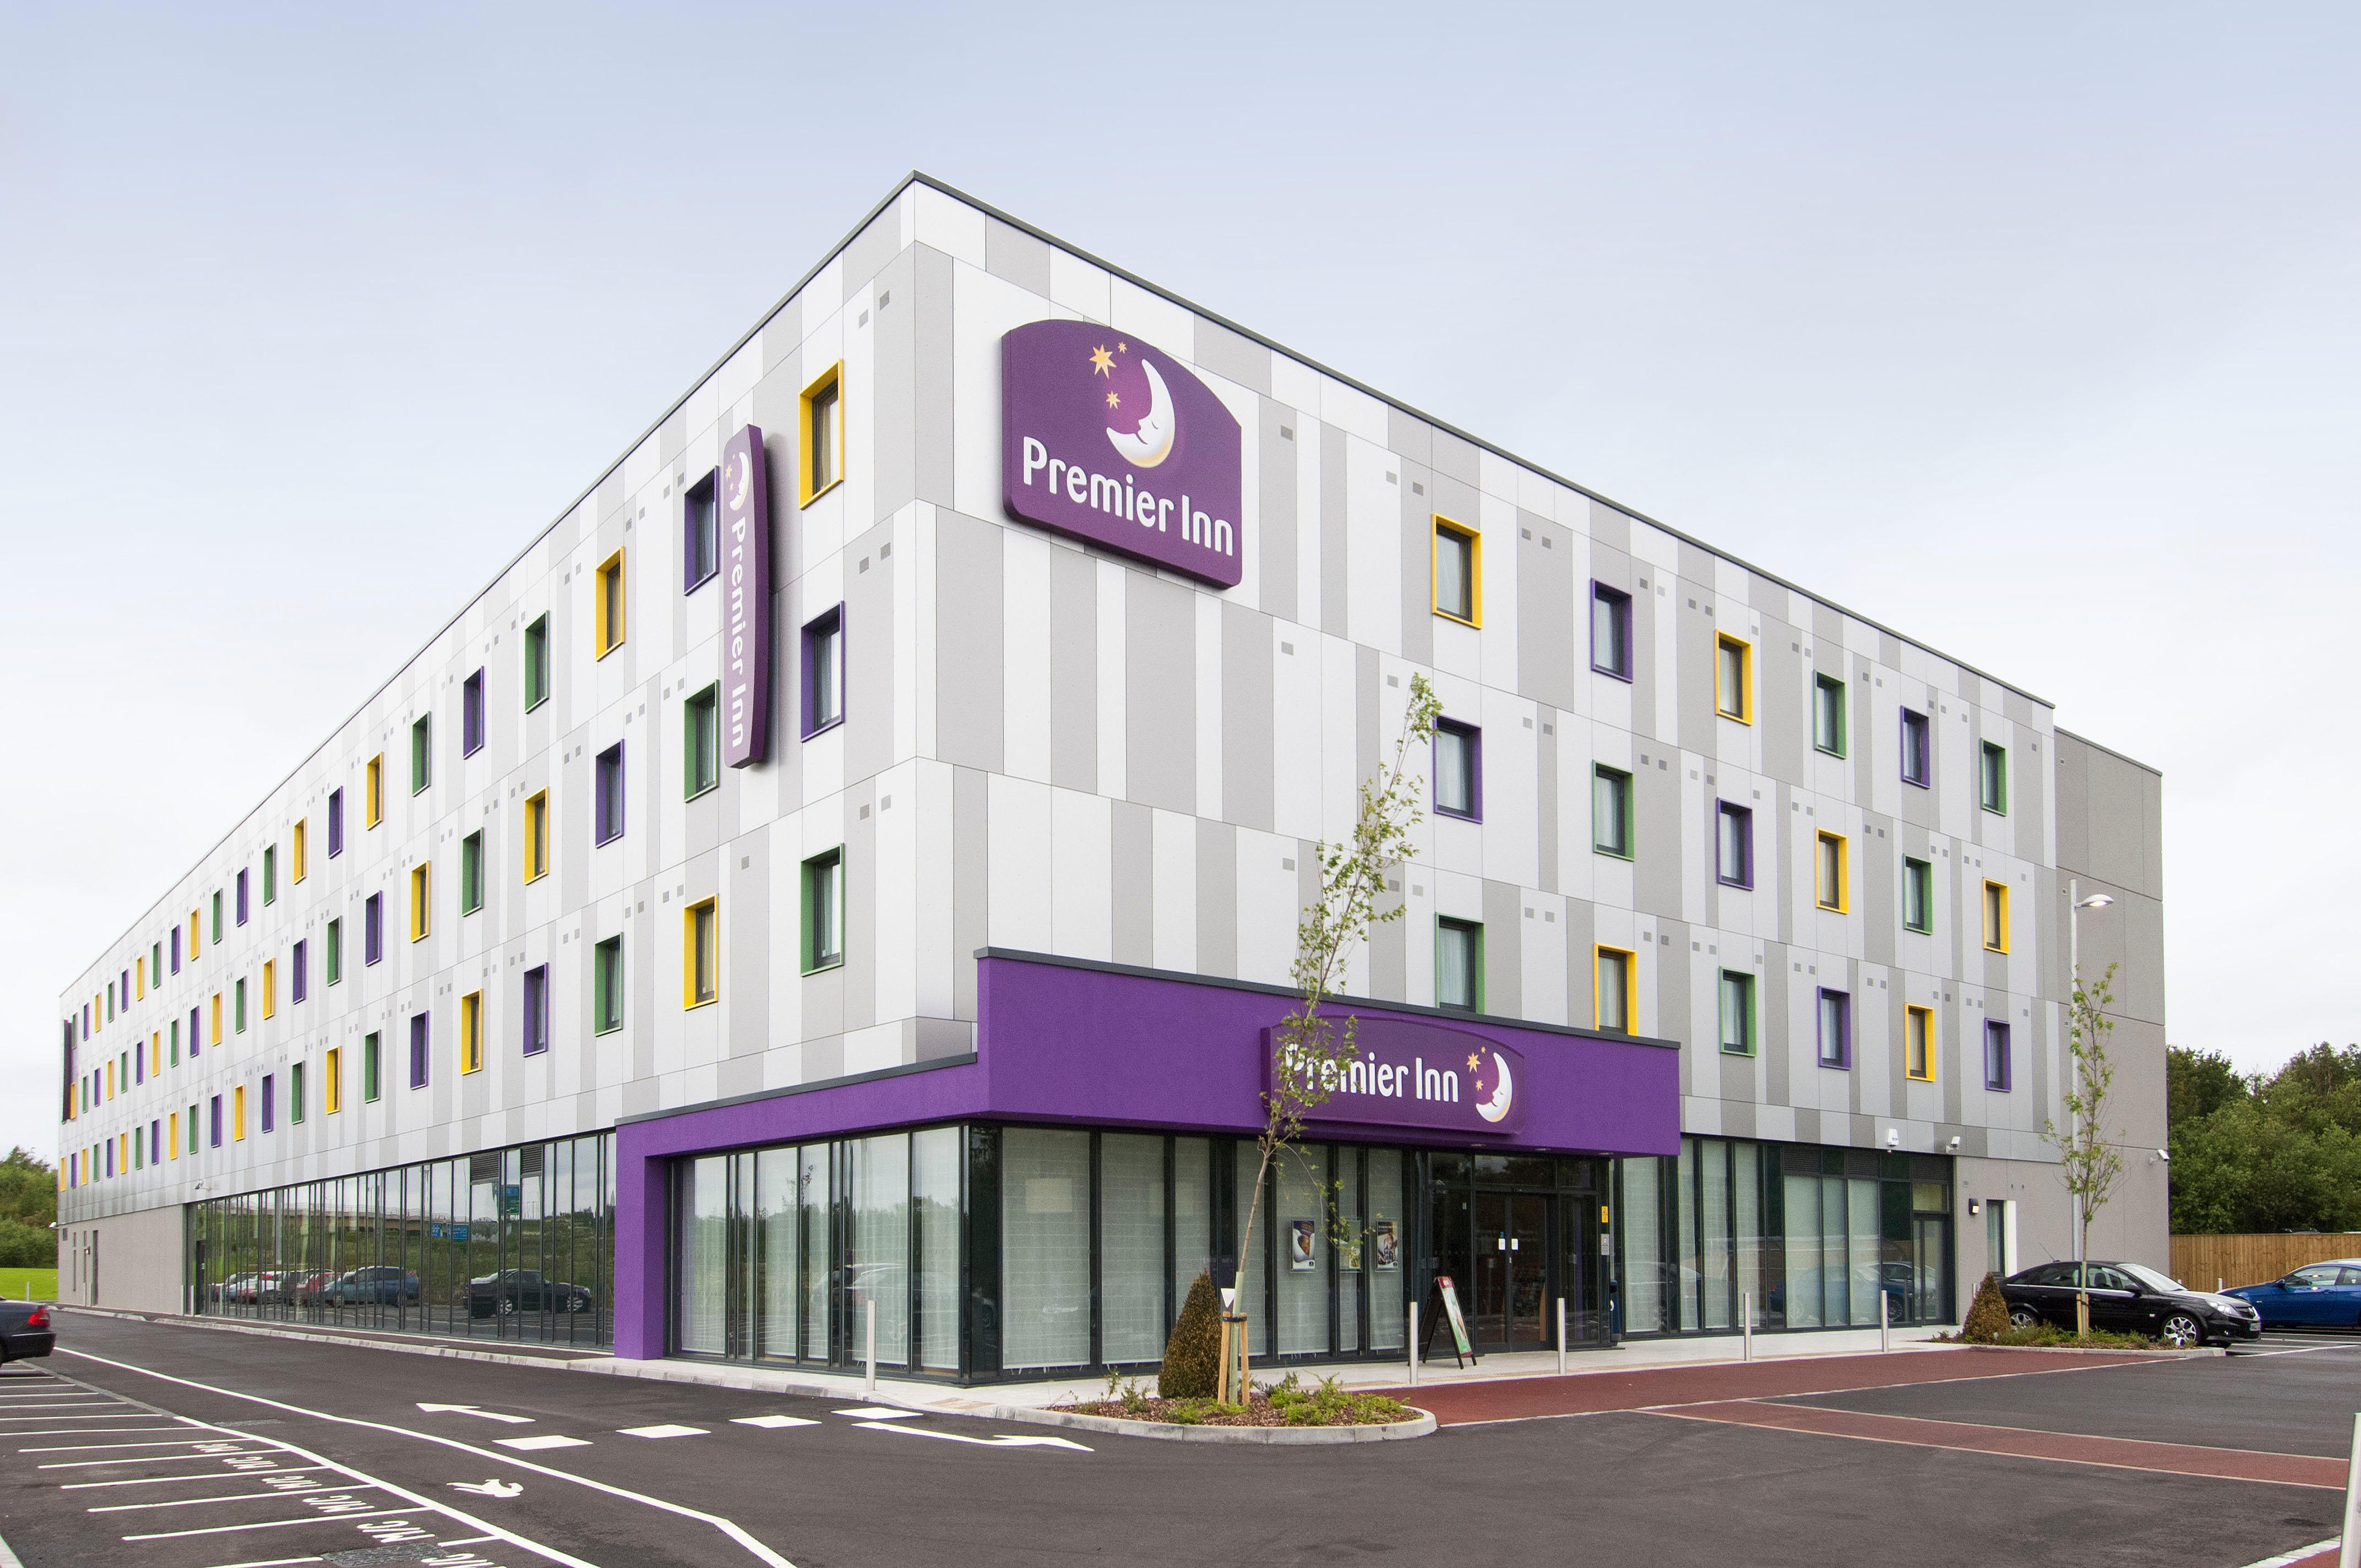 Premier Inn London Stansted Airport hotel Premier Inn London Stansted Airport hotel Stansted 03333 219264